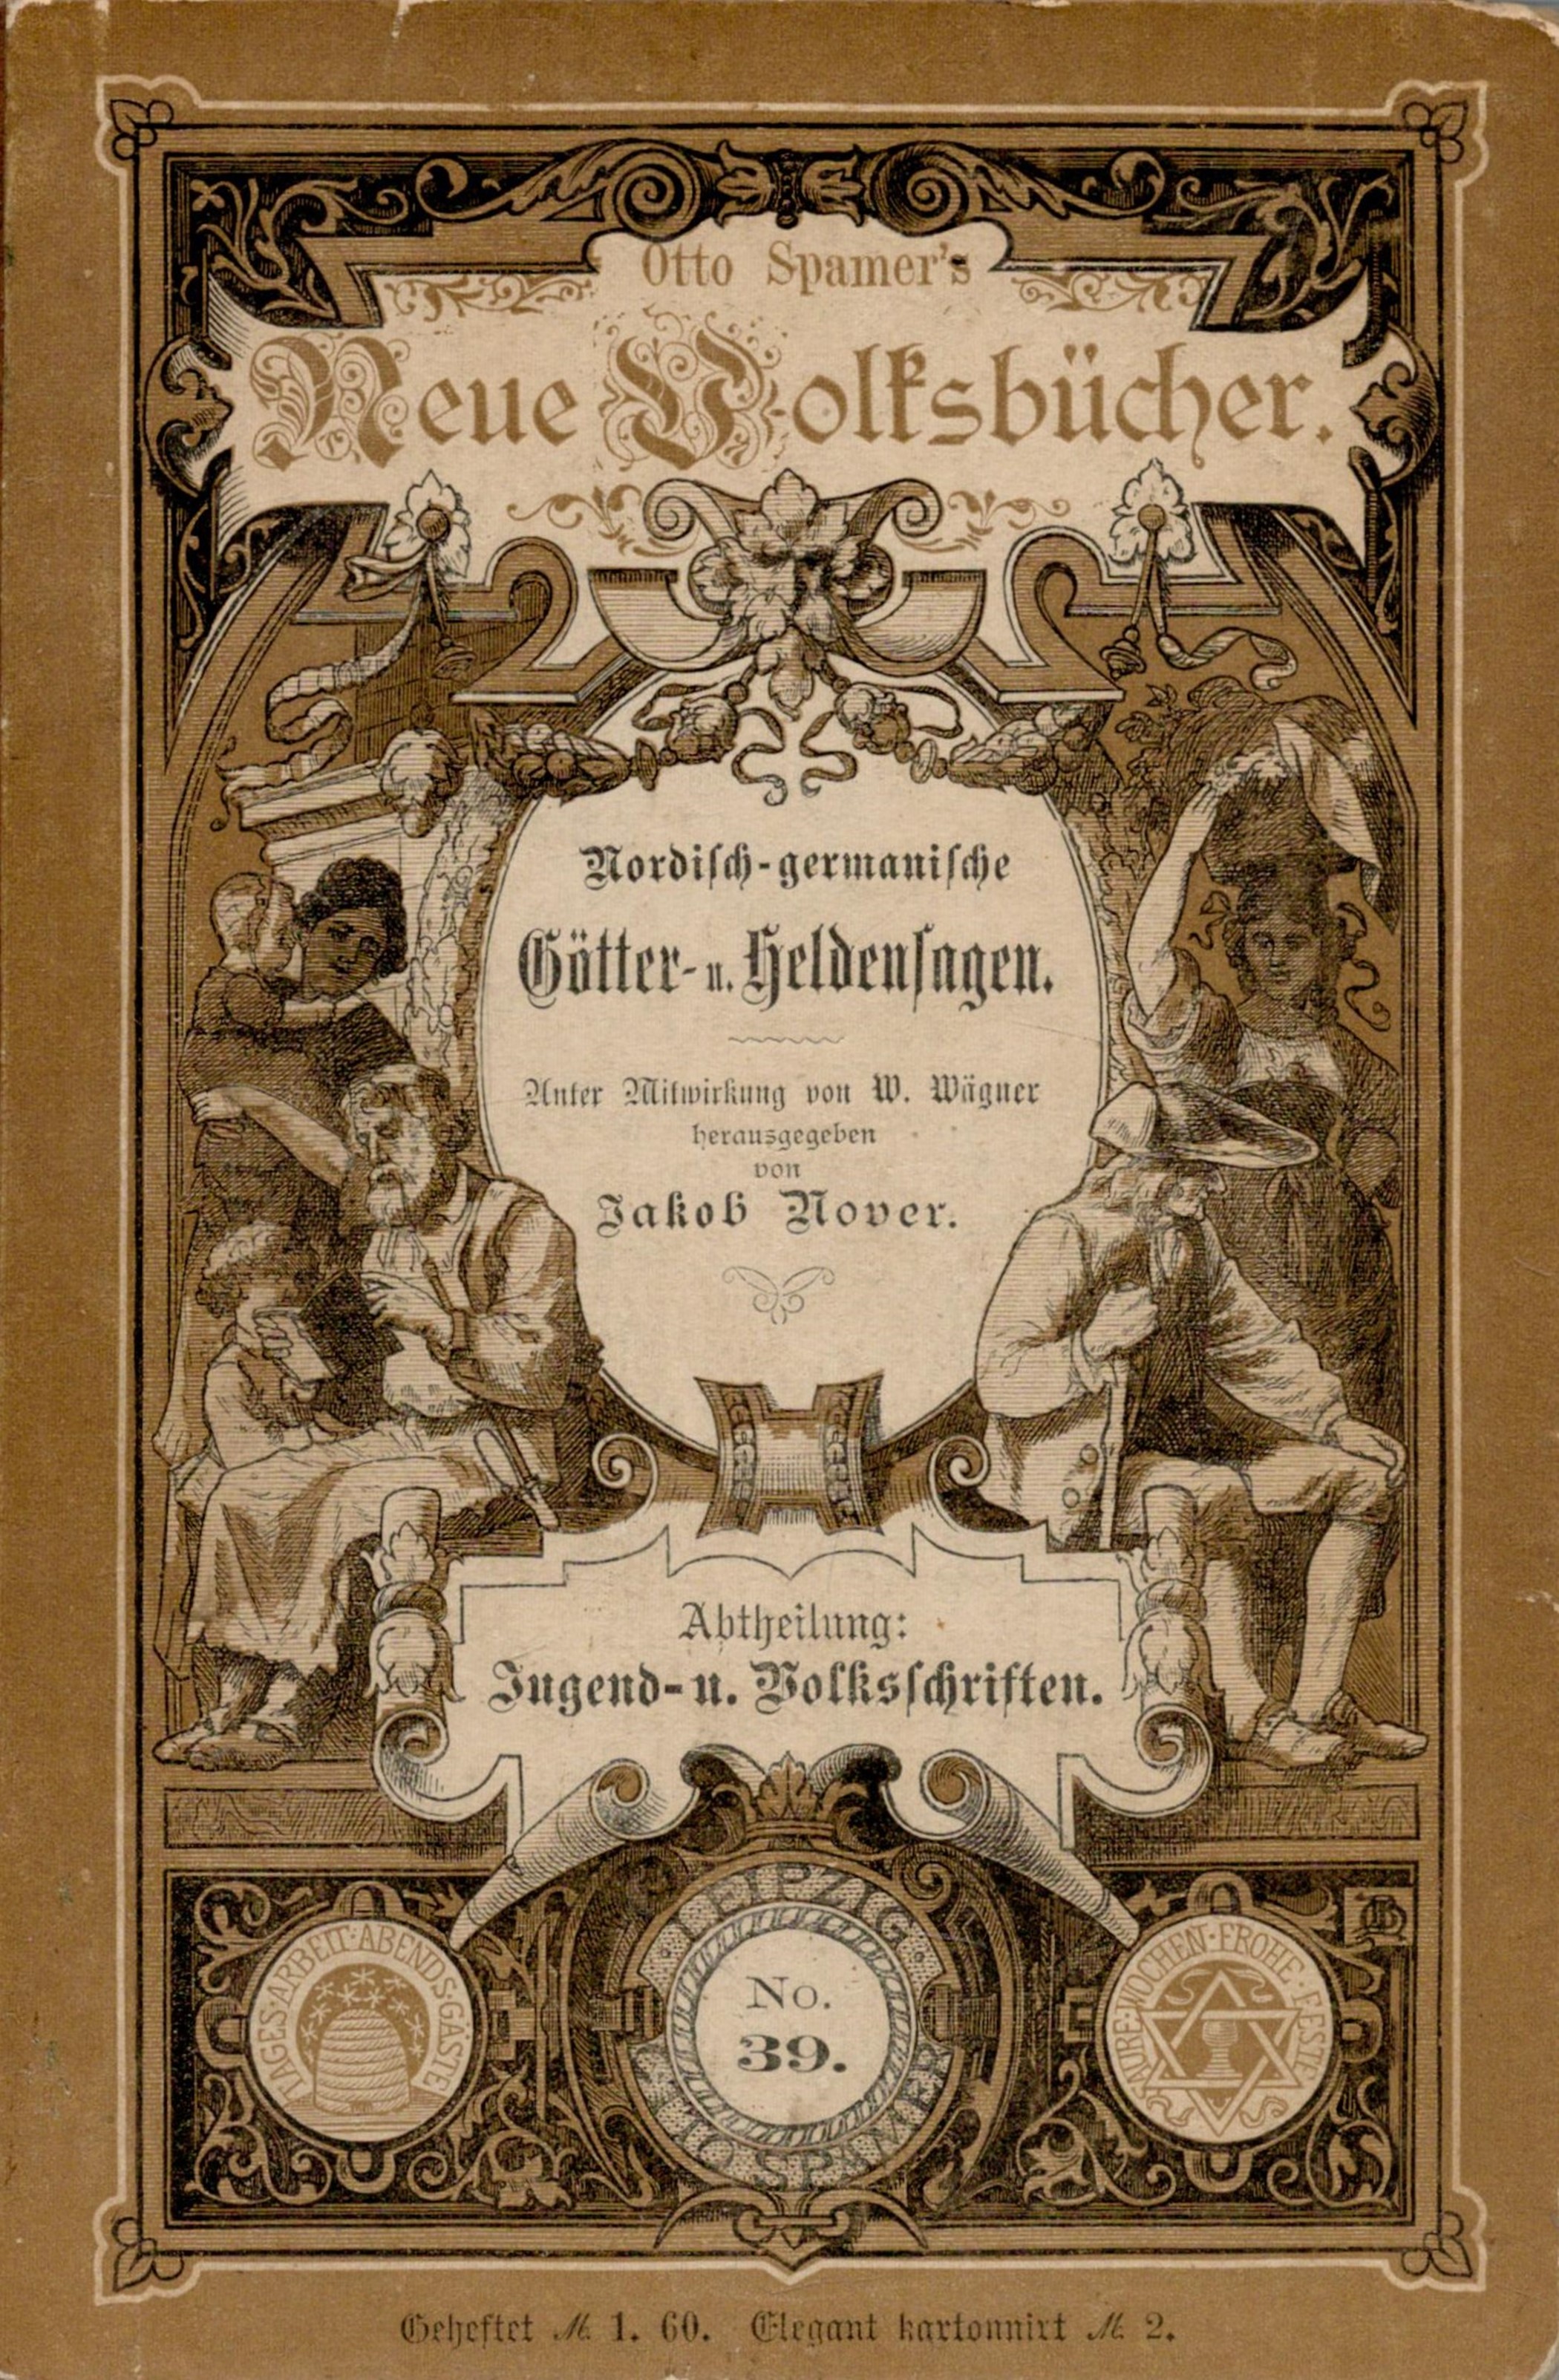 Otto Spamer's Neue Wolfsb?cher No. 39. 1st edition 1881. 213 pages plus advertisements. 5" x 7½".